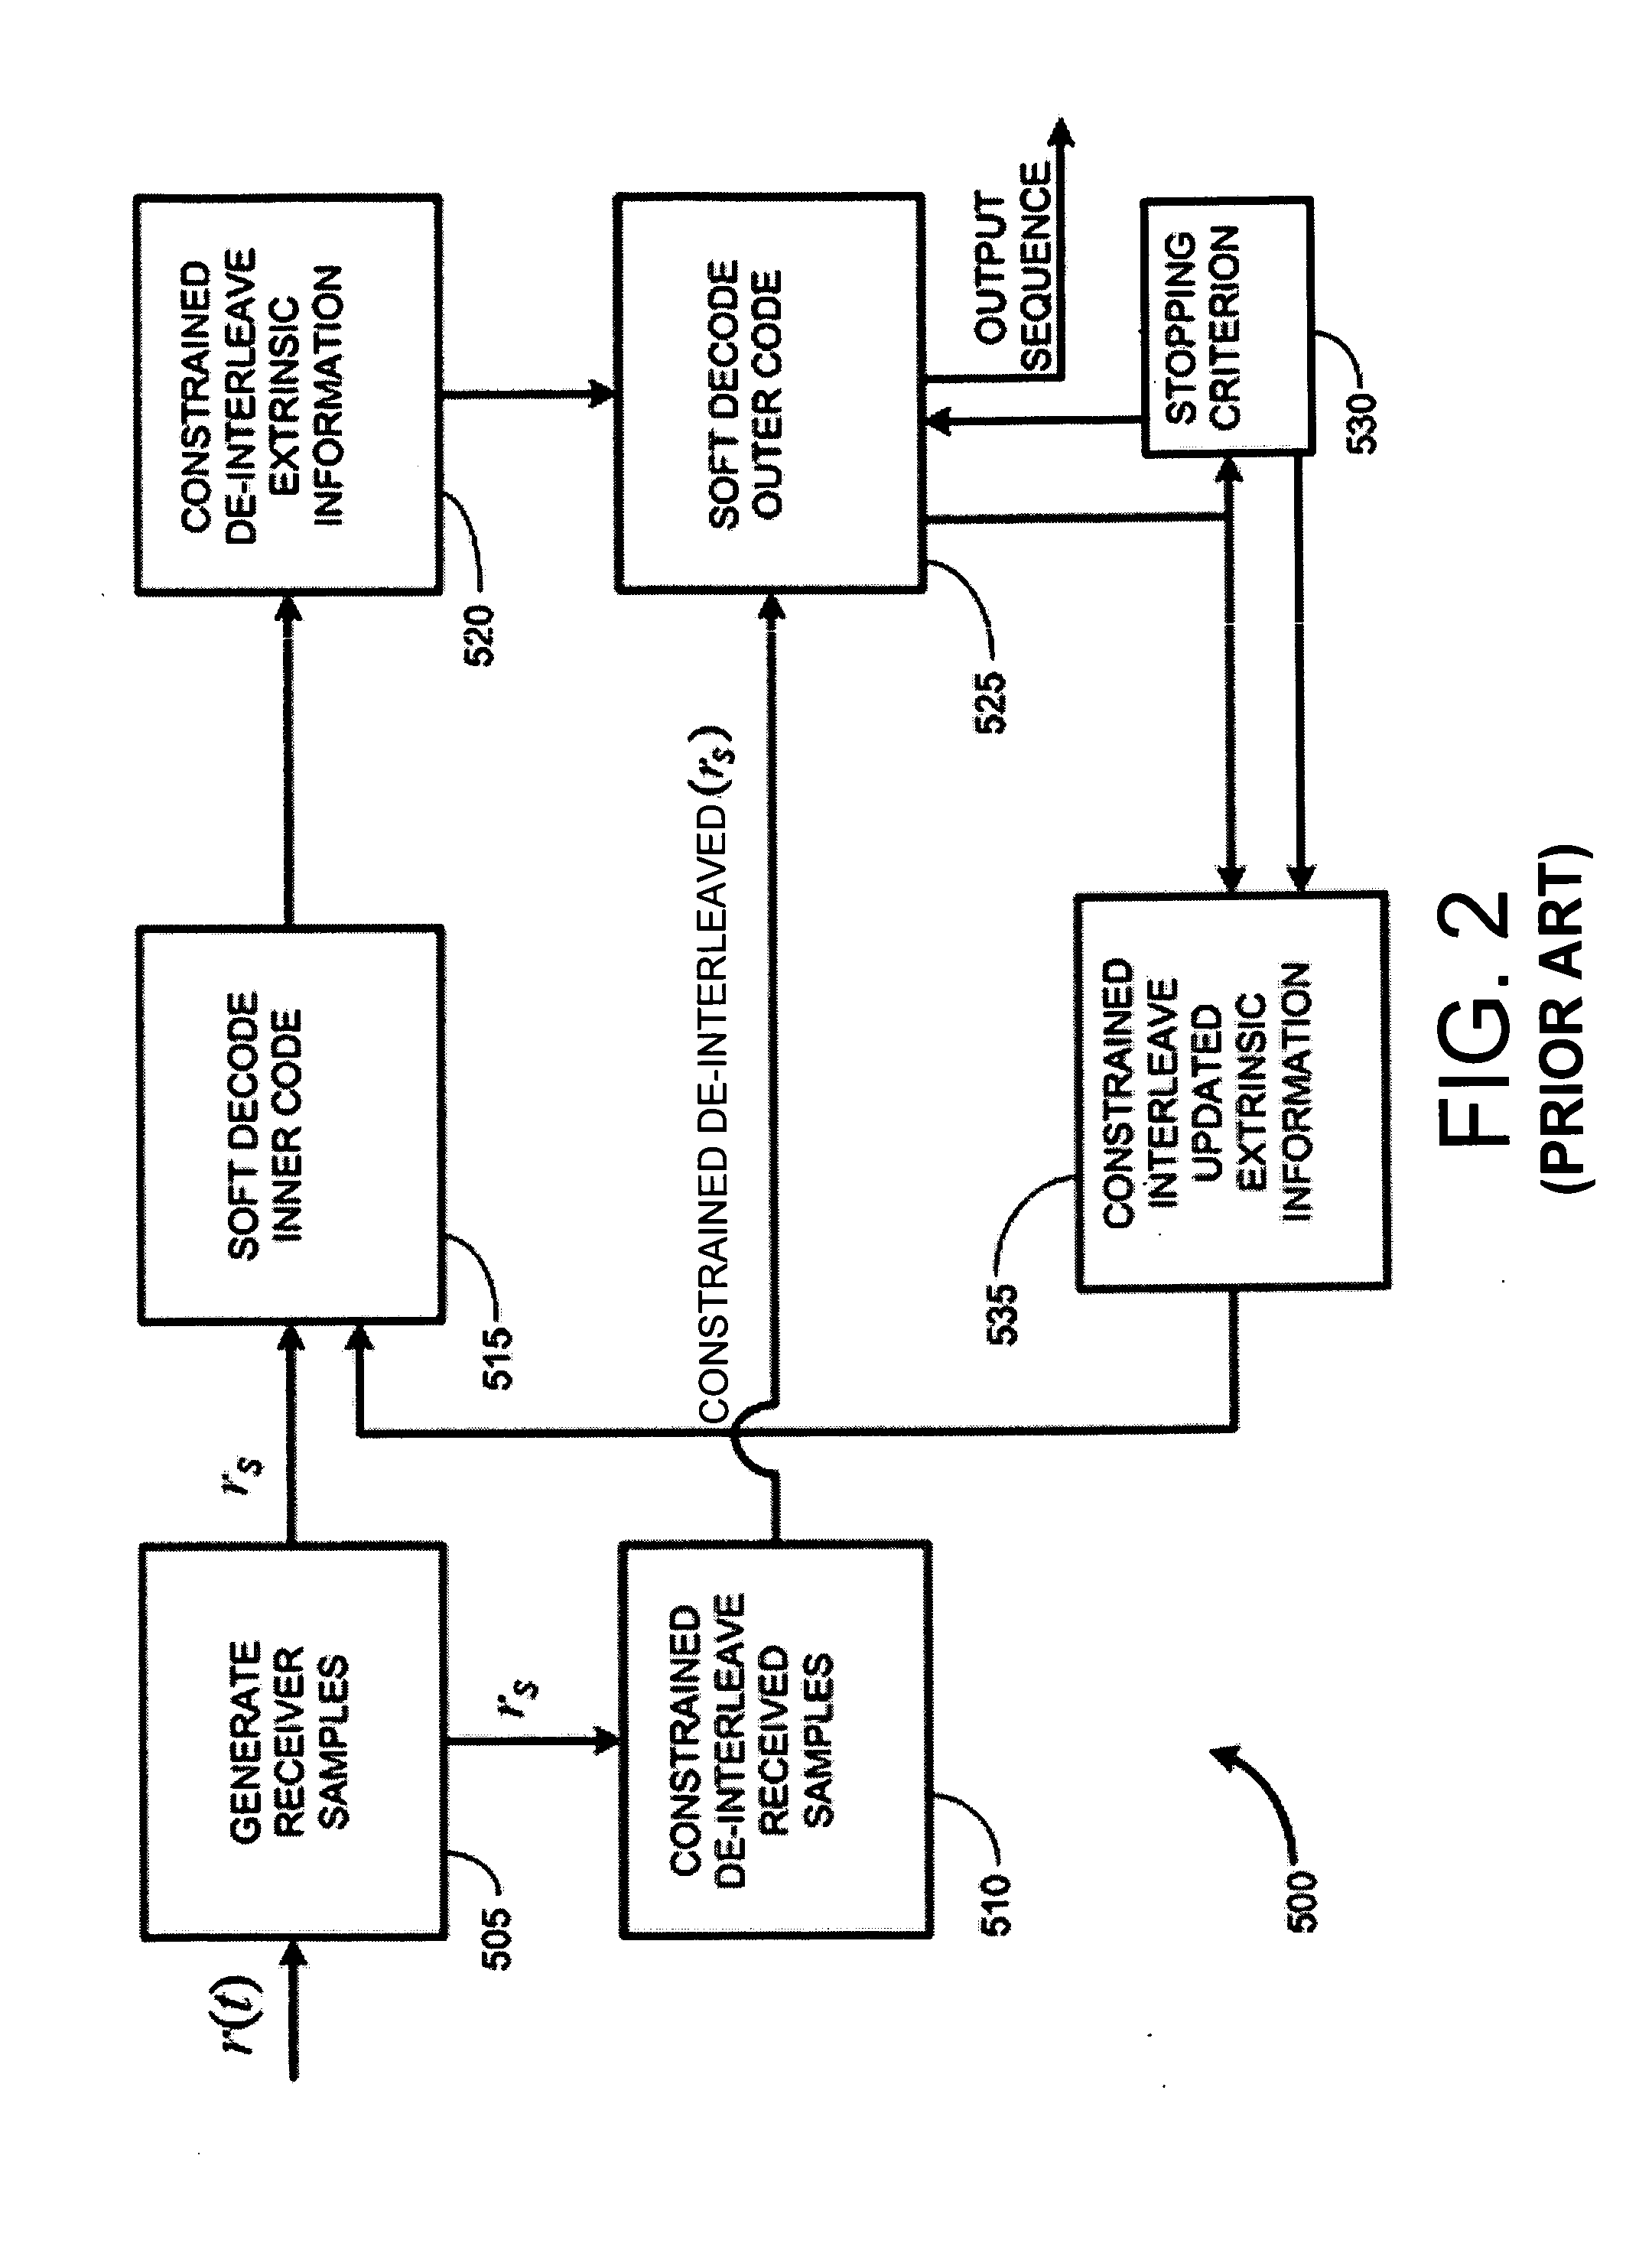 Parallel VLSI architectures for constrained turbo block convolutional decoding